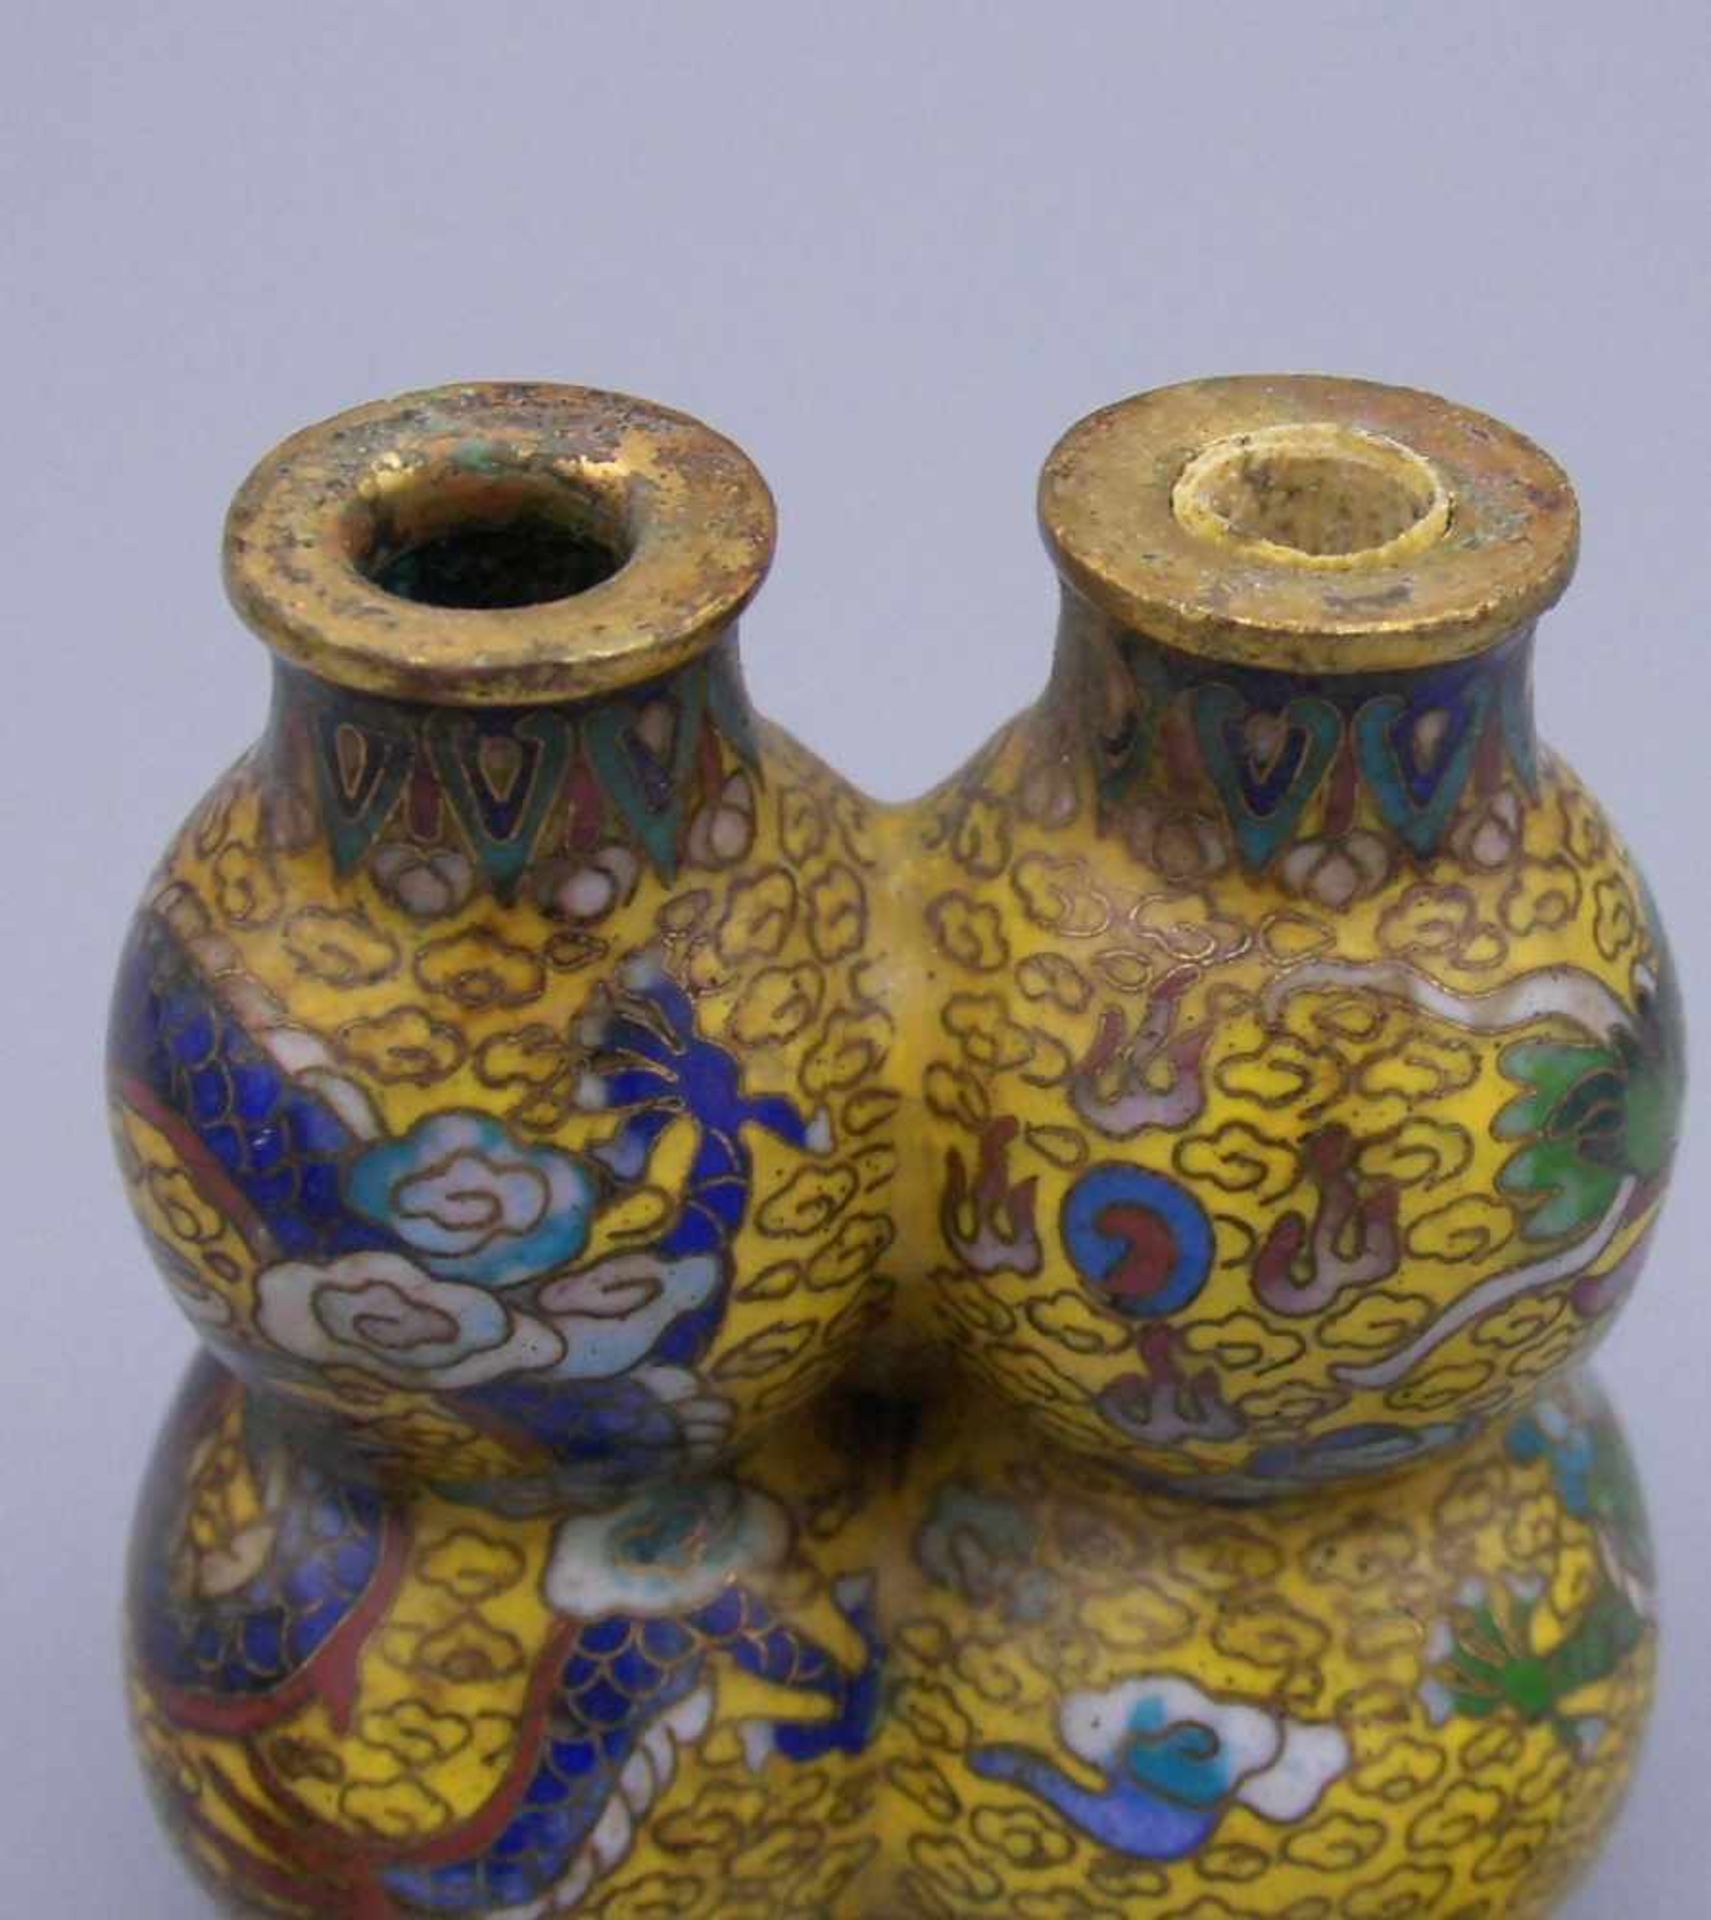 CLOISONNÉ - SNUFFBOTTLE / DOPPEL-SCHNUPFTABAKBEHÄLTER, China, Emaille über Messing. Doppel- - Image 7 of 7